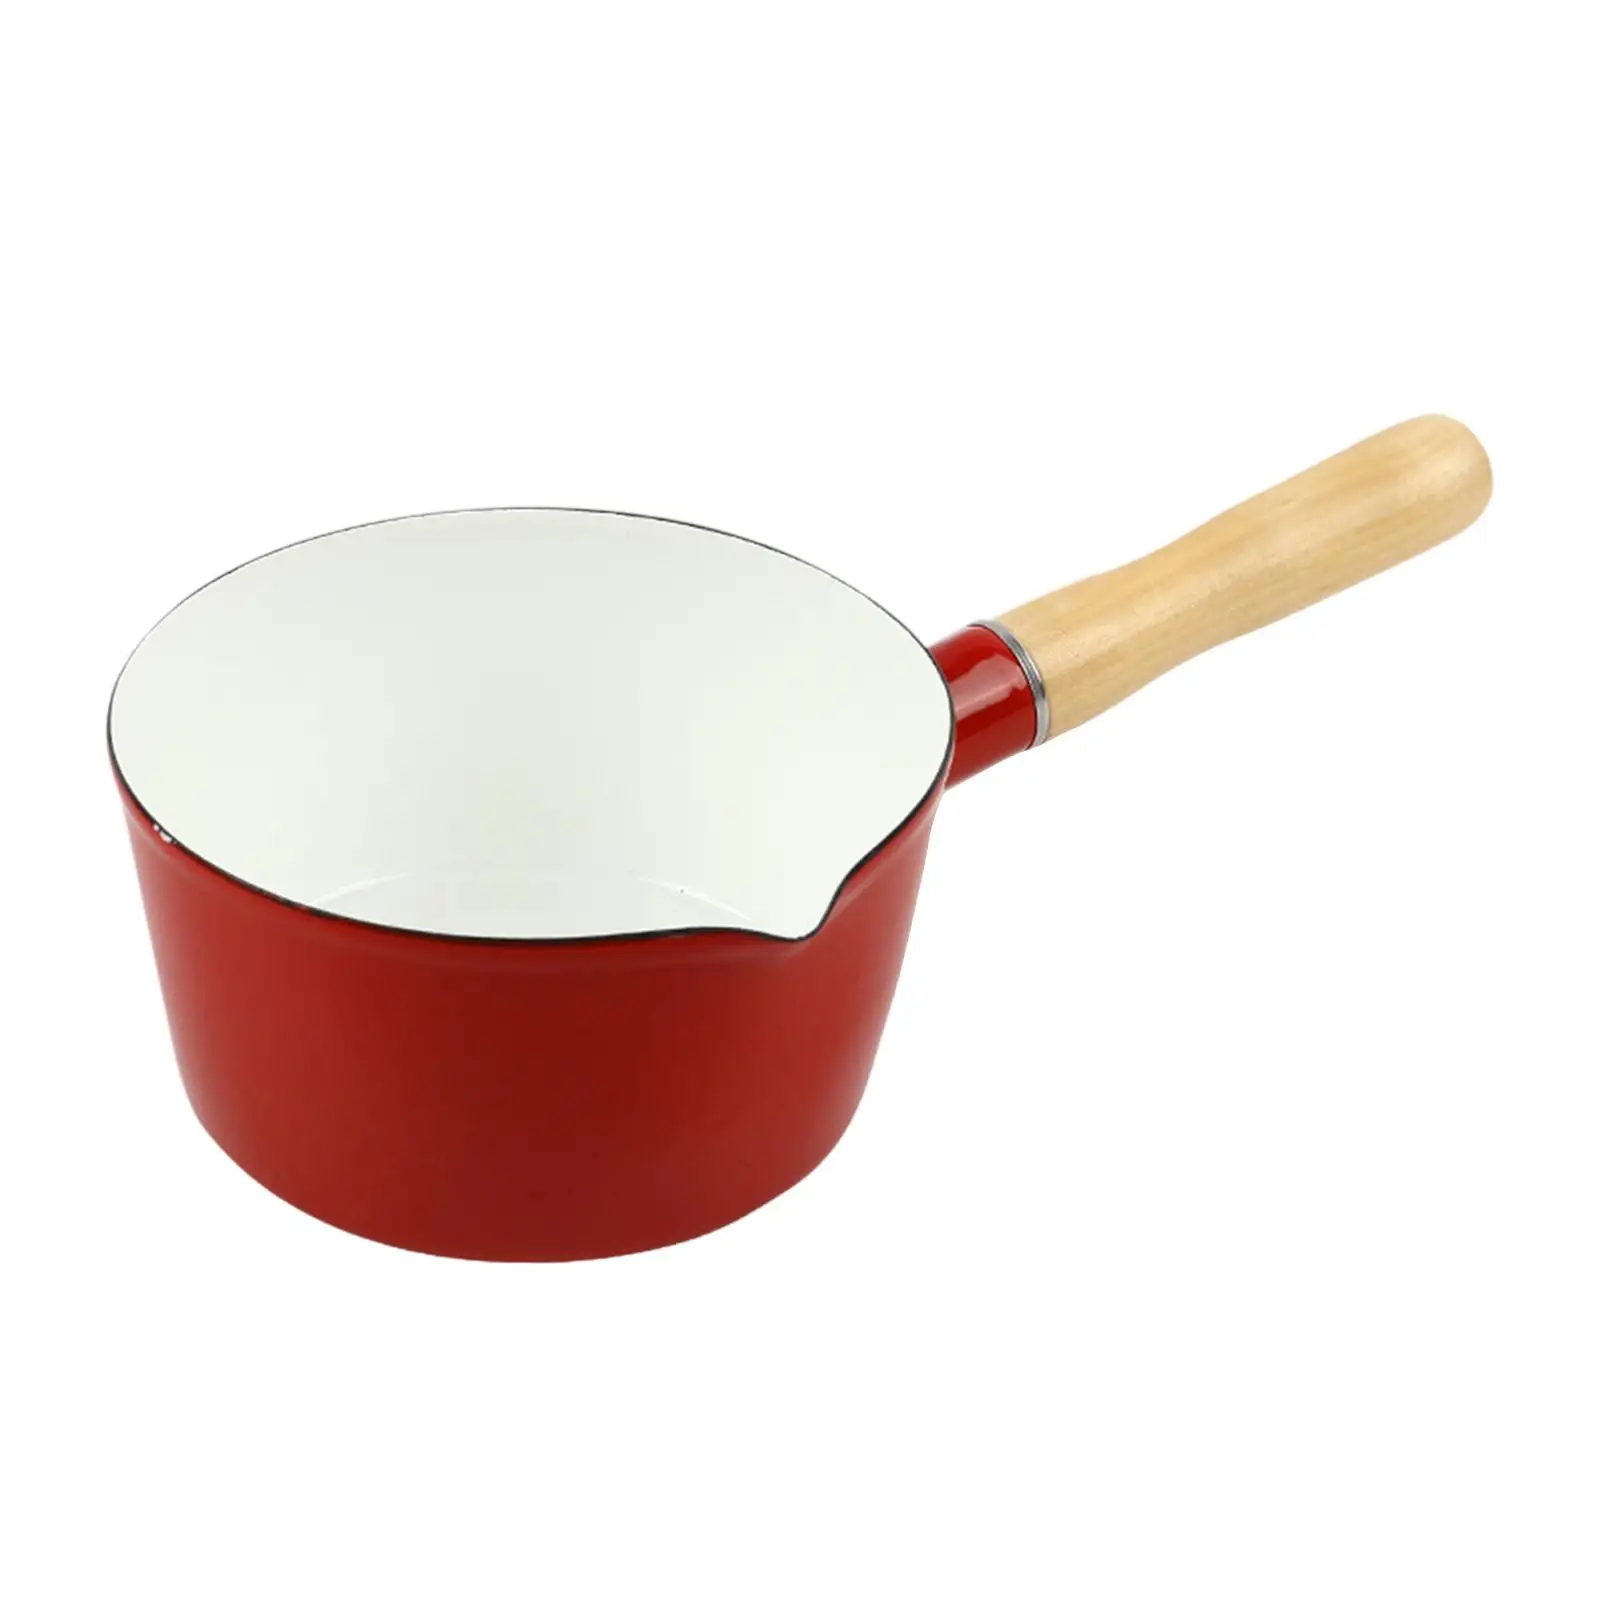 Small Milk Pan Butter Warmer Milk Container Heating Milk Small Cookware Saucepan Pan for Cafe Picnic Hotel Teahouse Bar